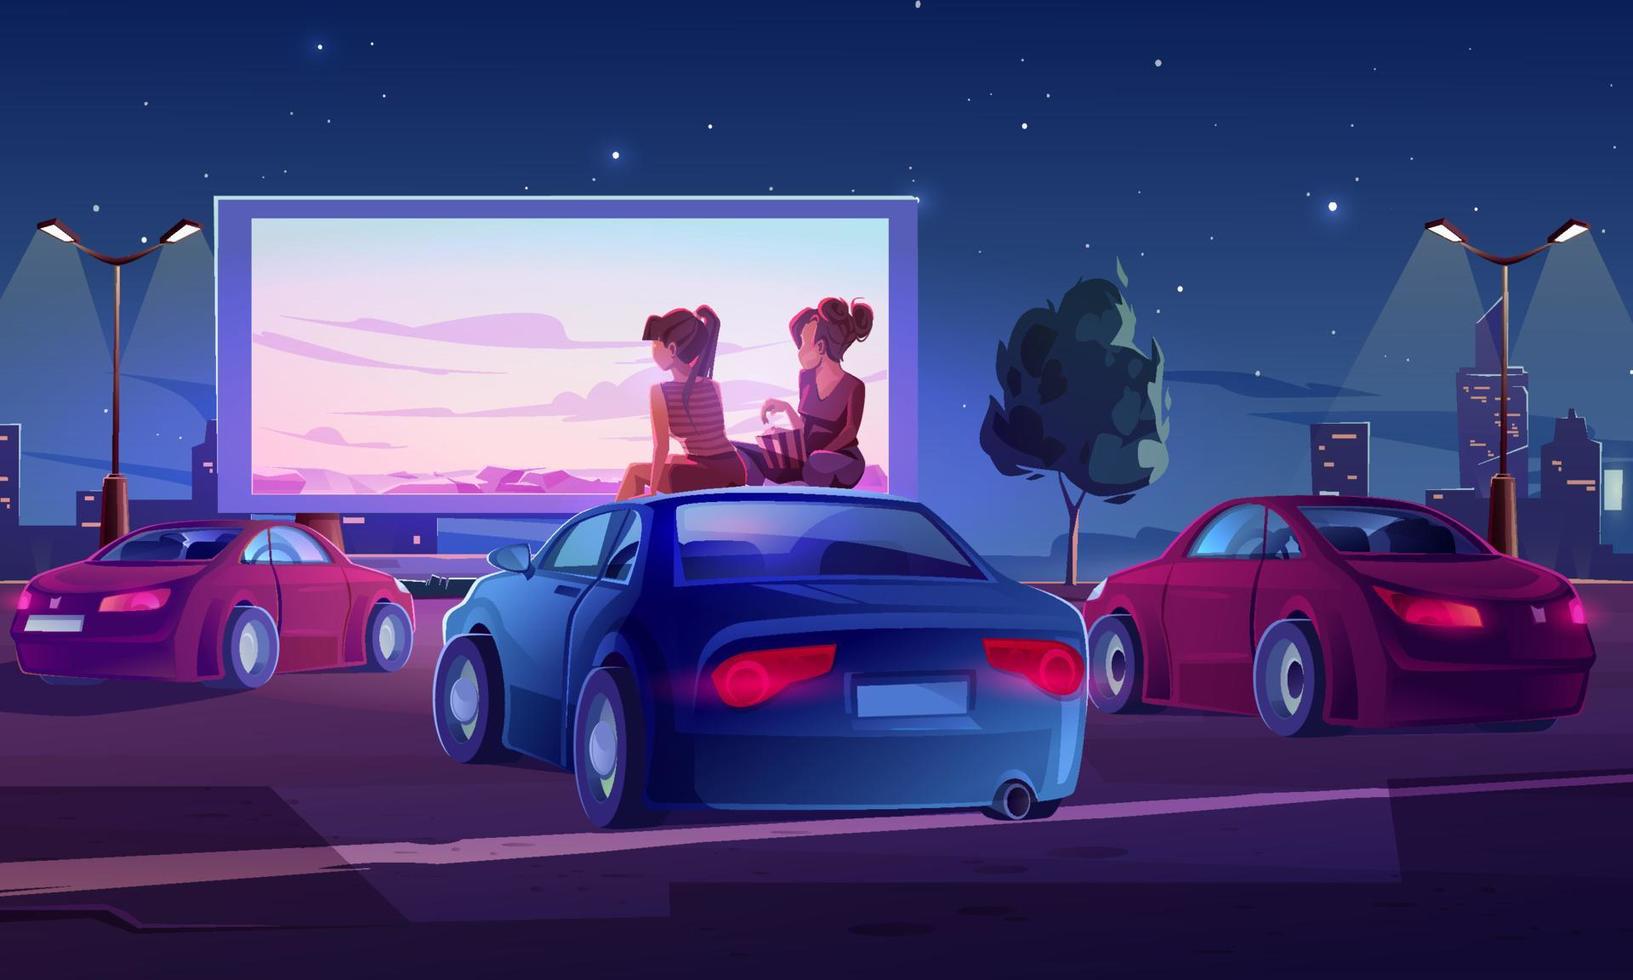 Outdoor cinema, open air movie theater with cars vector